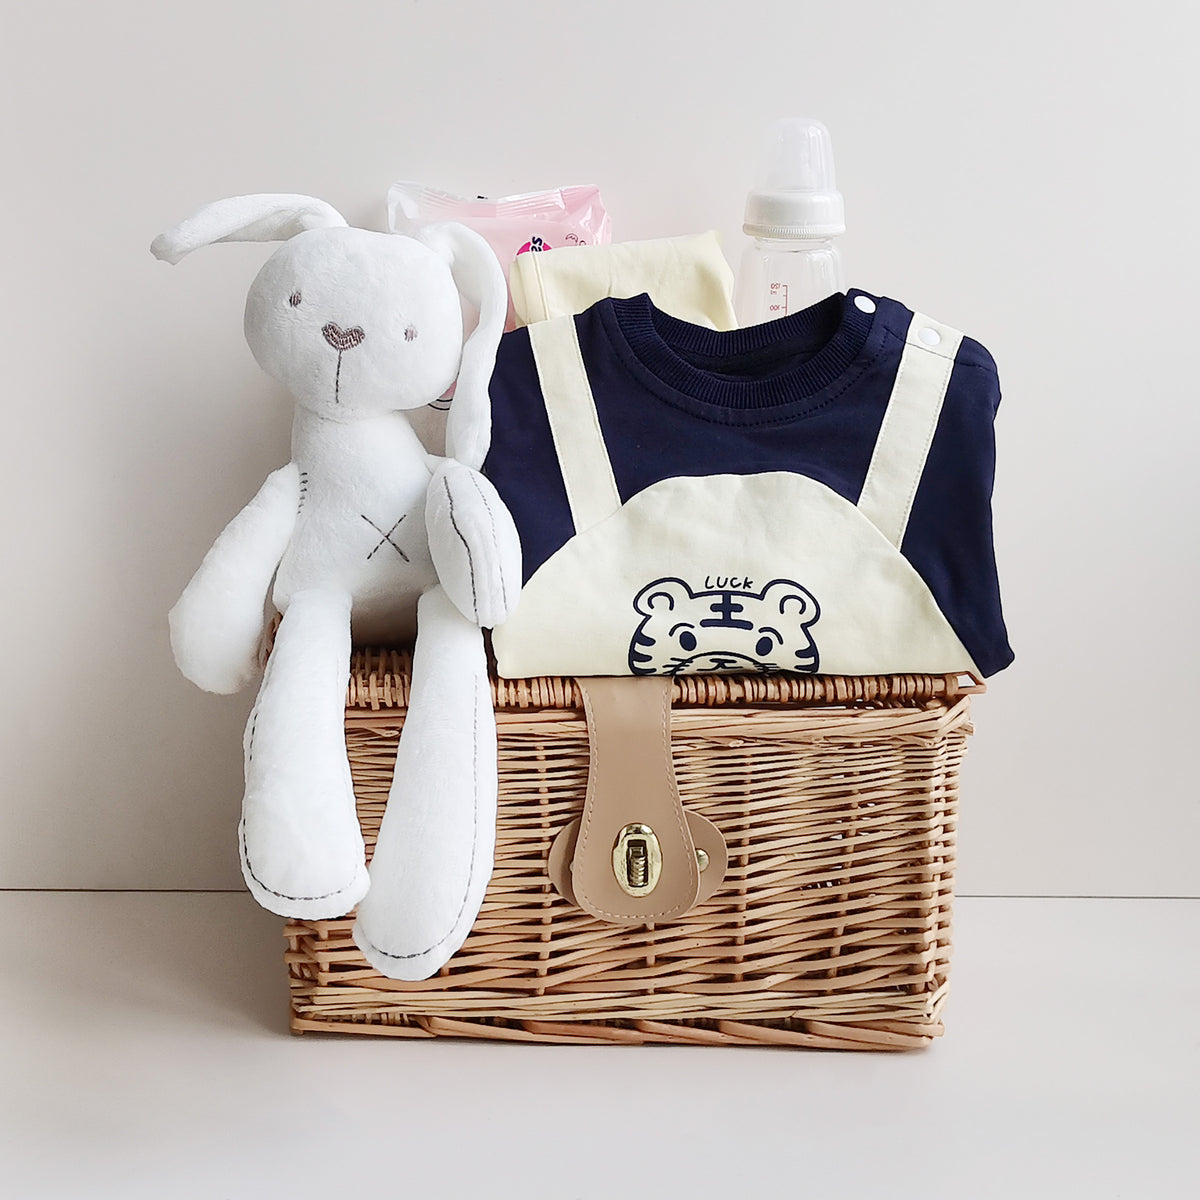 Baby Gift Box Set | babyBirthday gifts, full-month gift box sets, newborn gifts